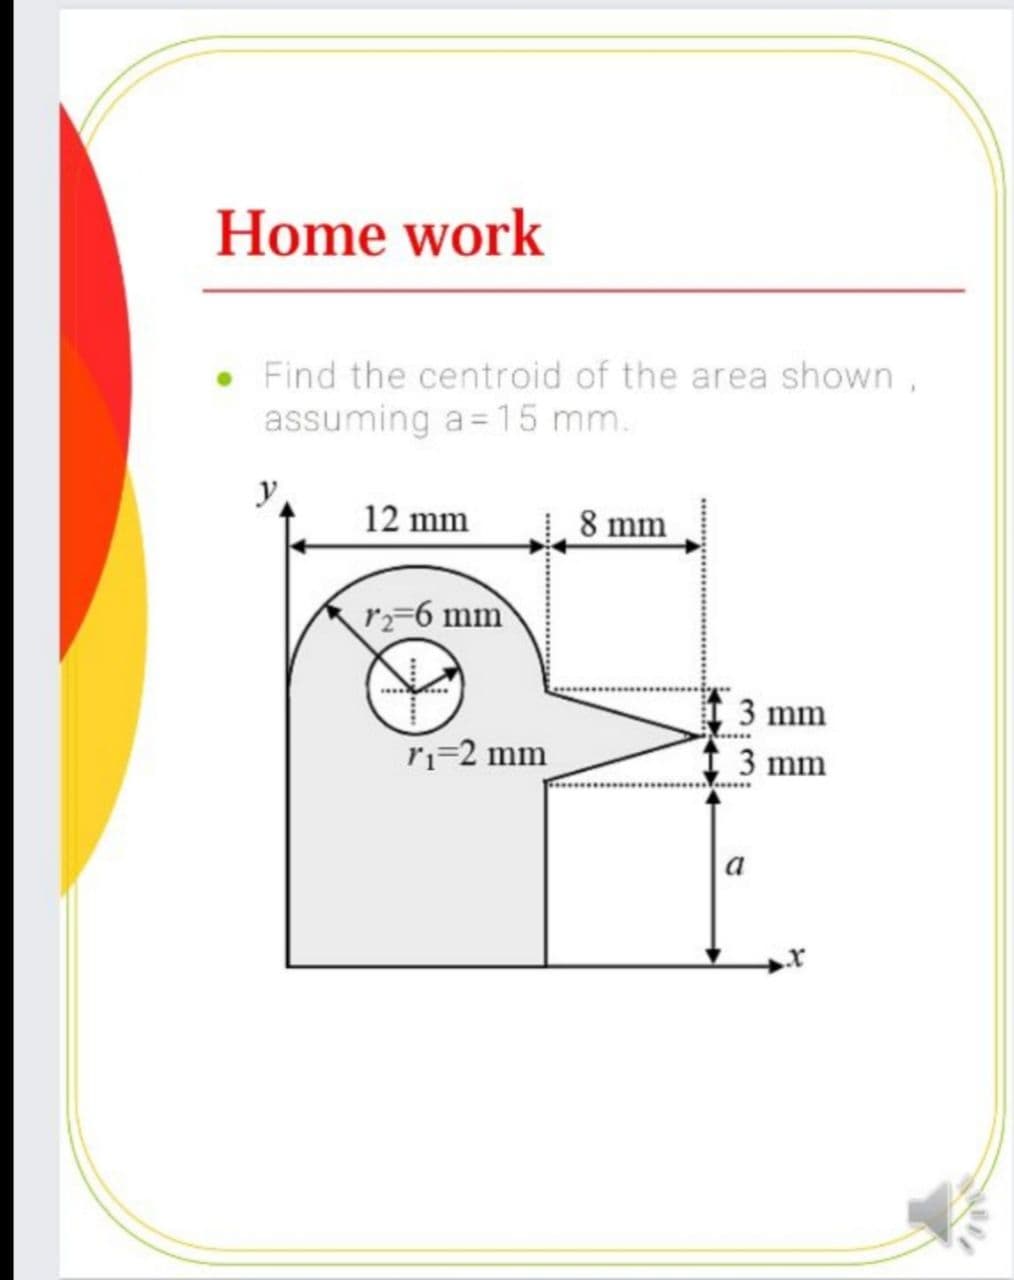 Home work
Find the centroid of the area shown,
assuming a= 15 mm.
y
12 mm
8 mm
r=6 mm
3 mm
ri-2 mm
3 mm
a
